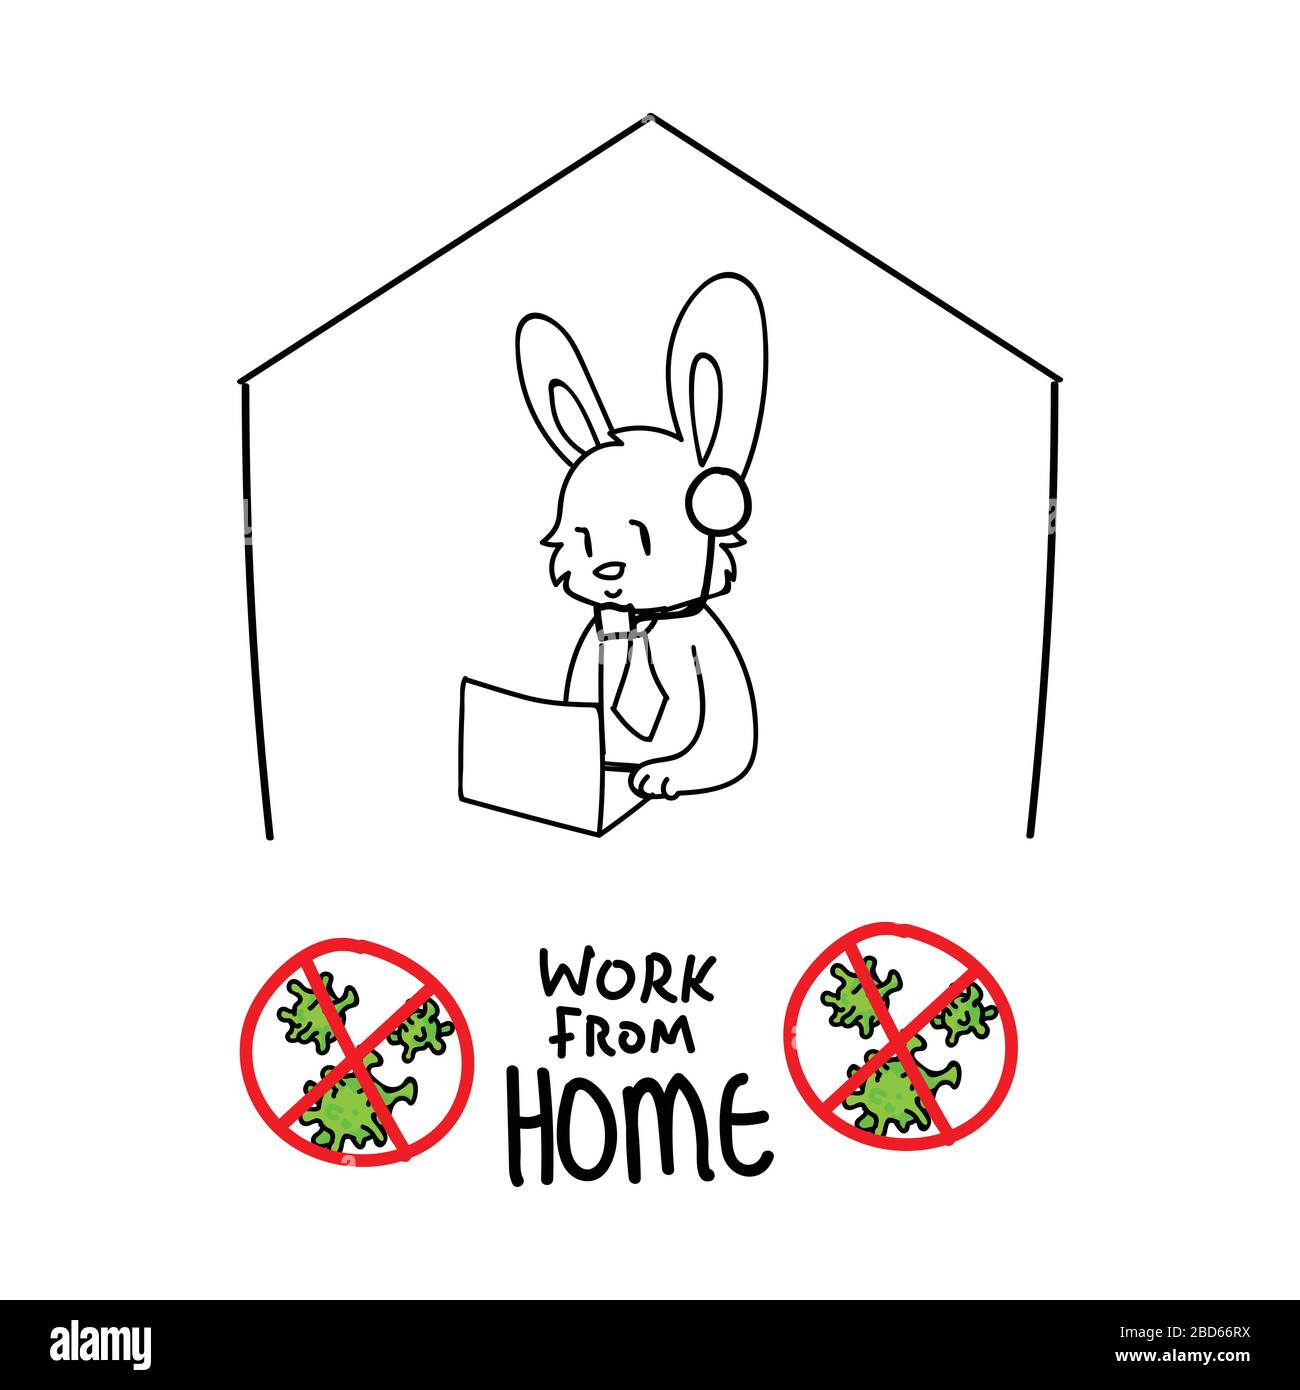 Corona virus kids cartoon work from home cute rabbit laptop infographic. Educational graphic self isolate family. Friendly social icon for children Stock Vector